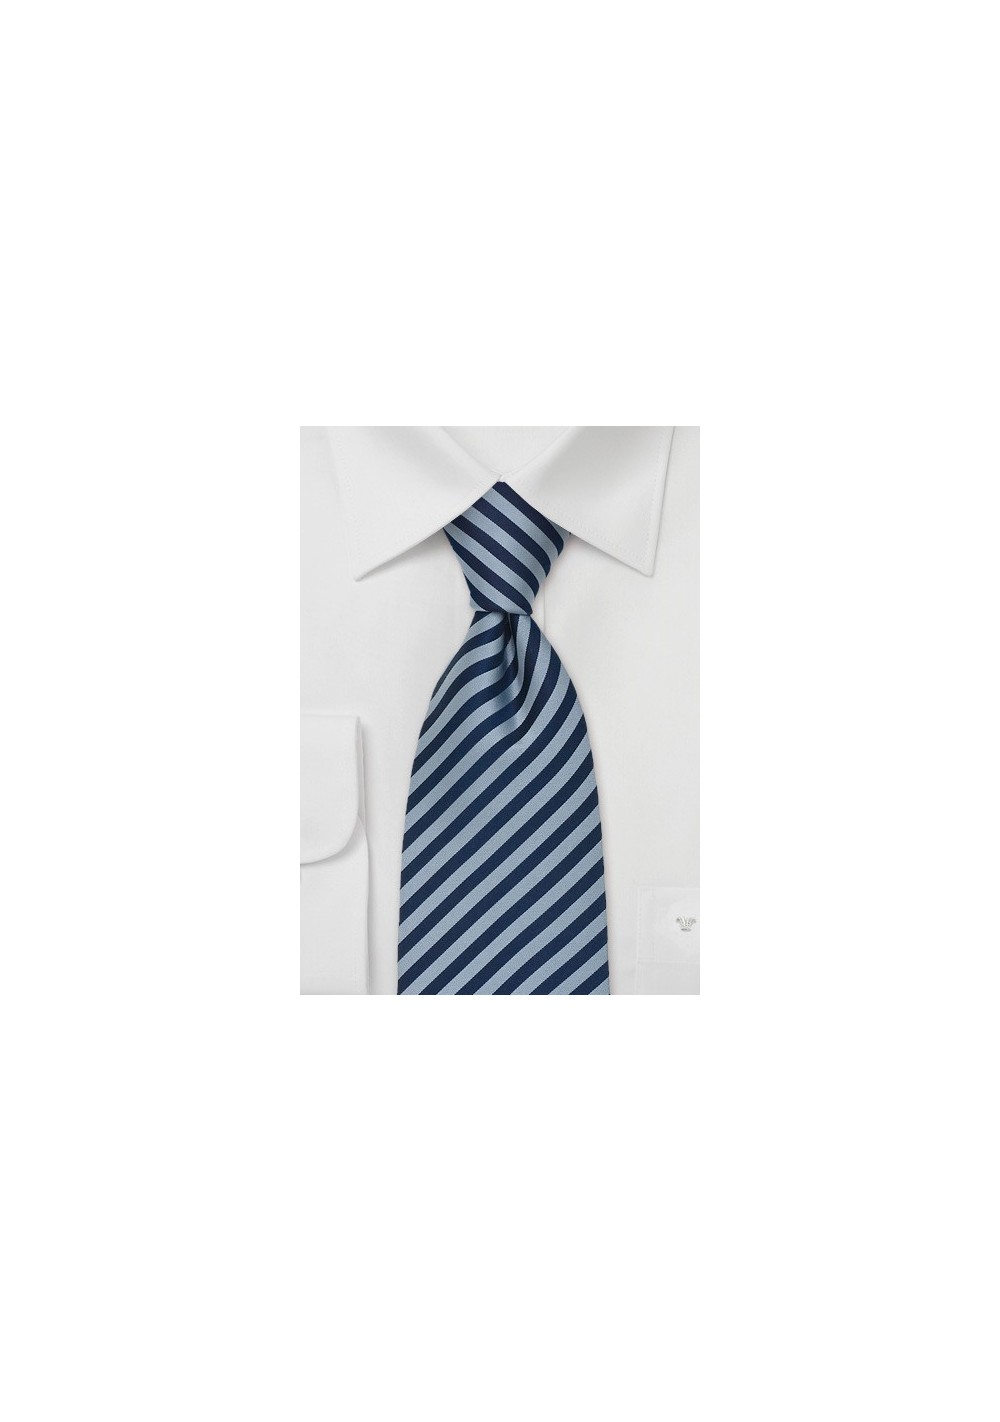 Striped Mens Ties - Striped Tie "Signals" by Parsley